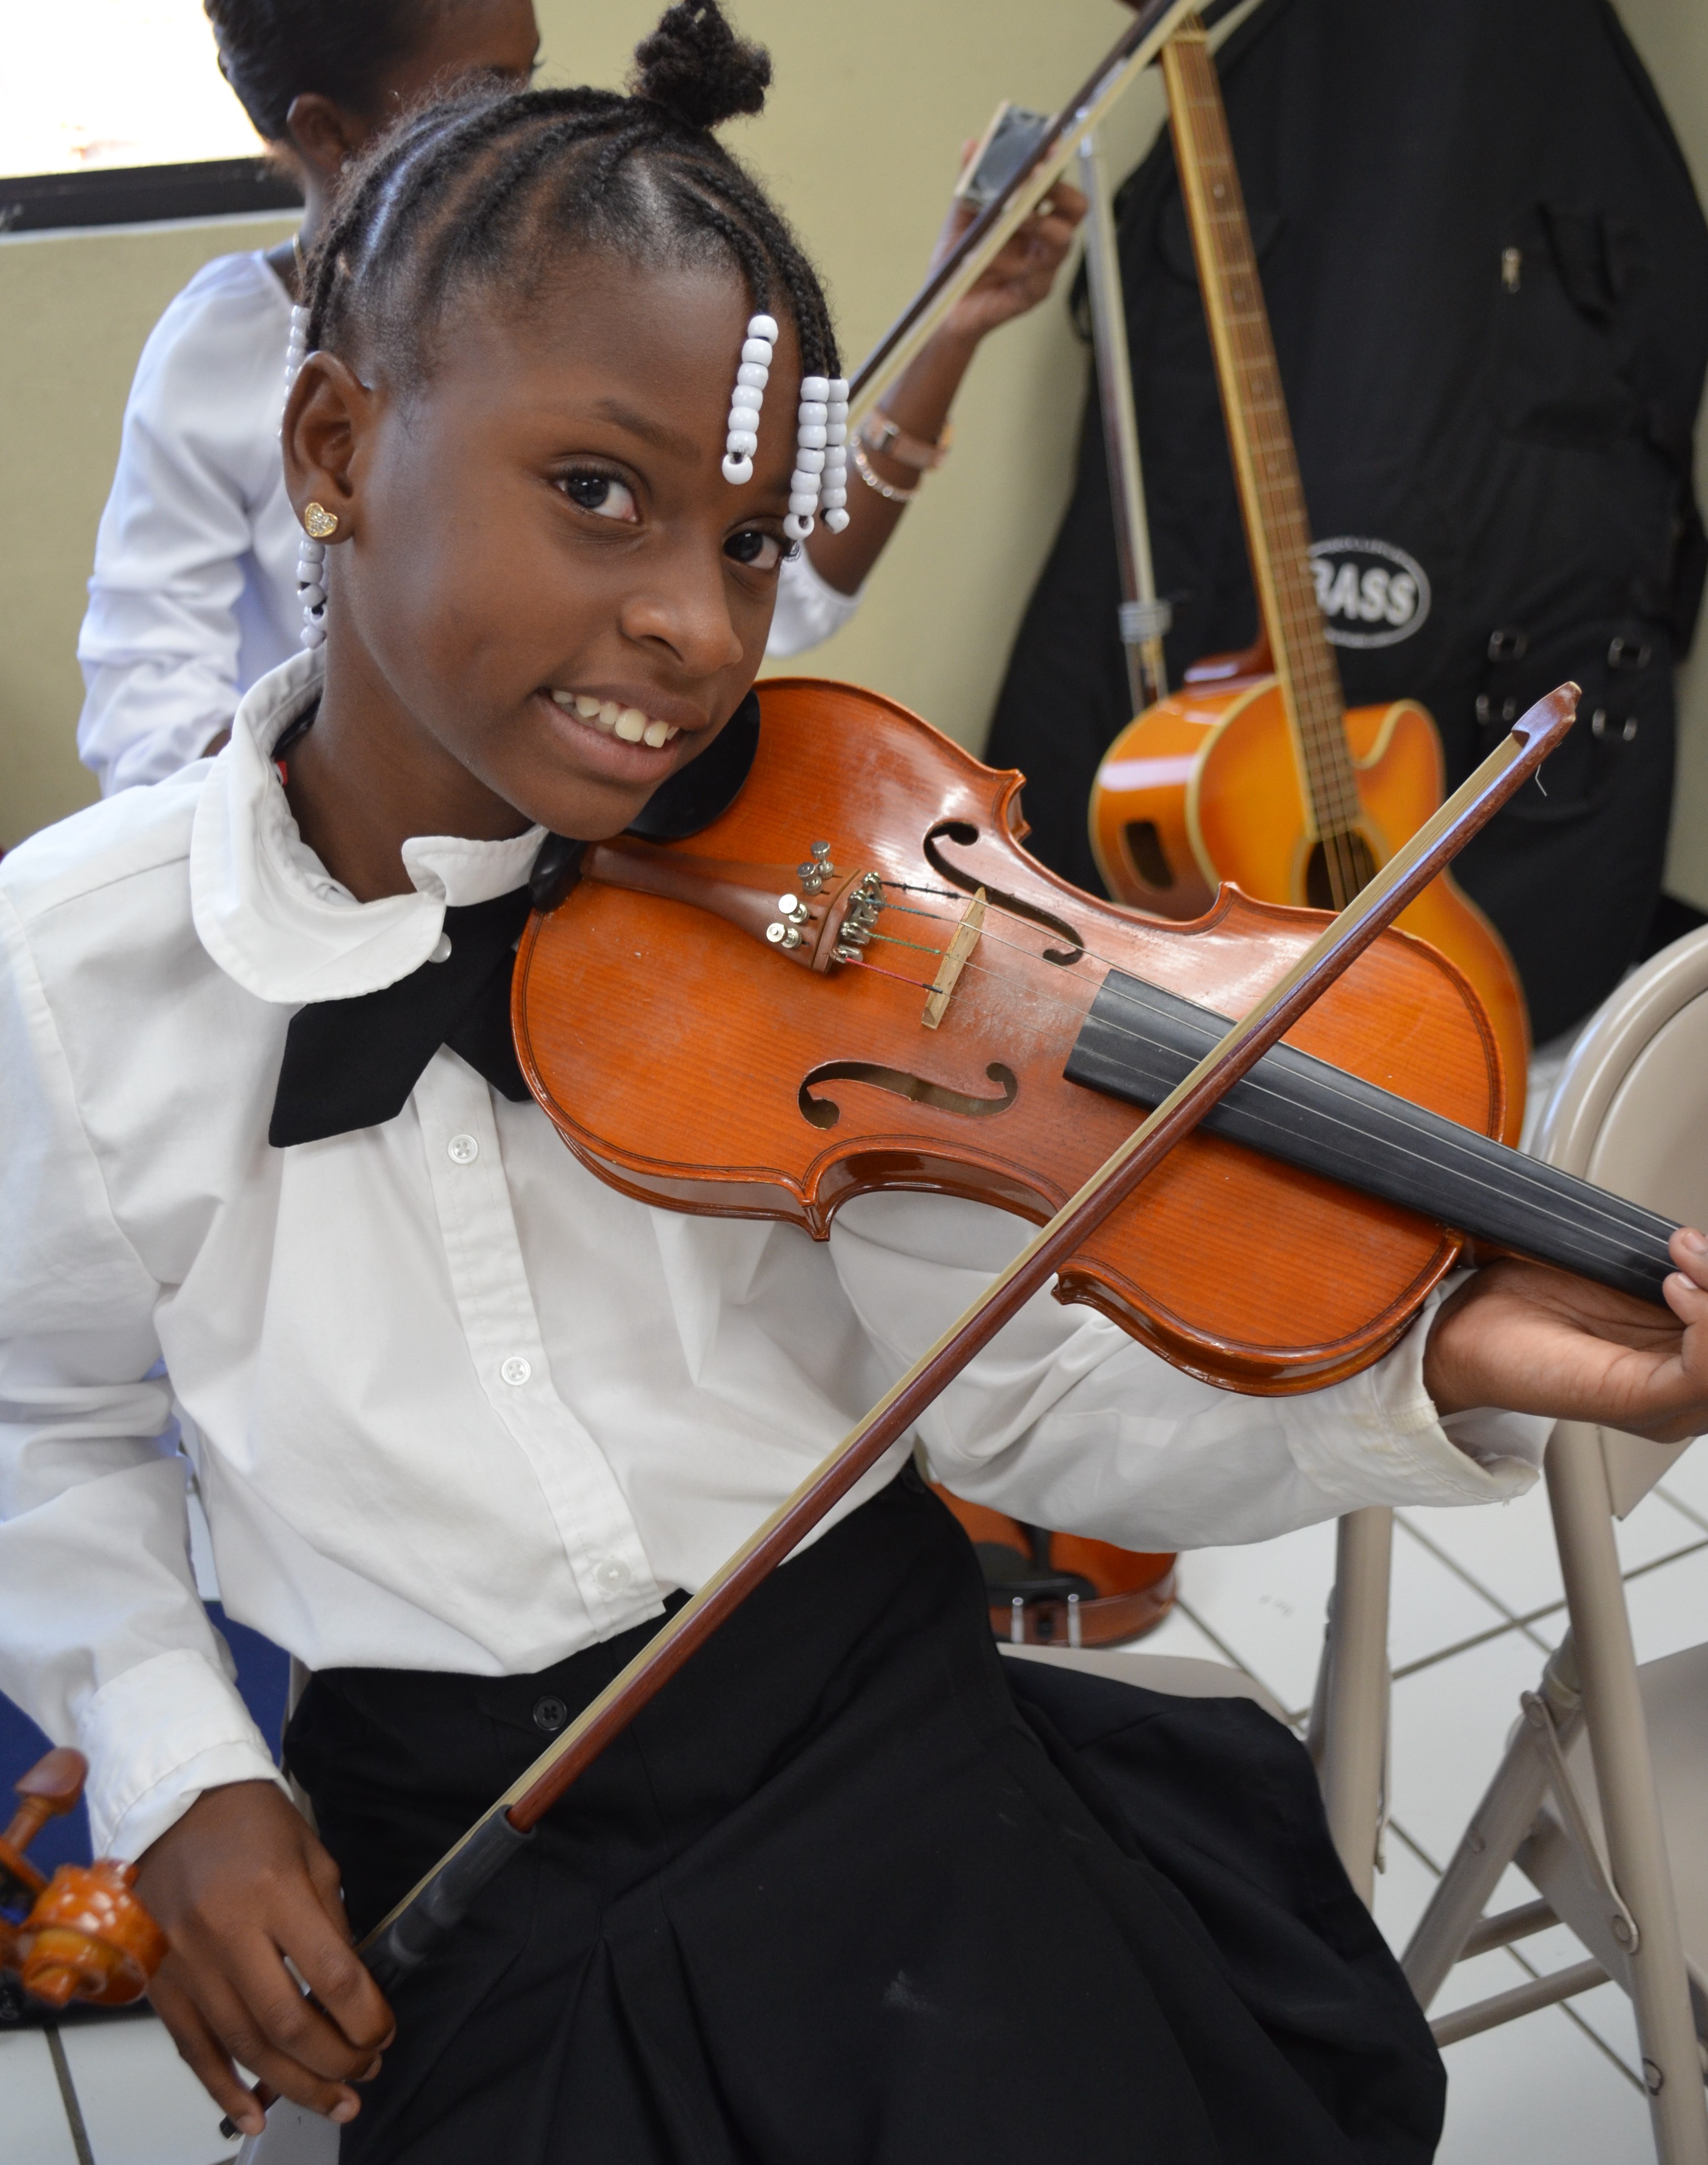 Music Academy Offering Scholarships For New Members Of VI Youth String Orchestra